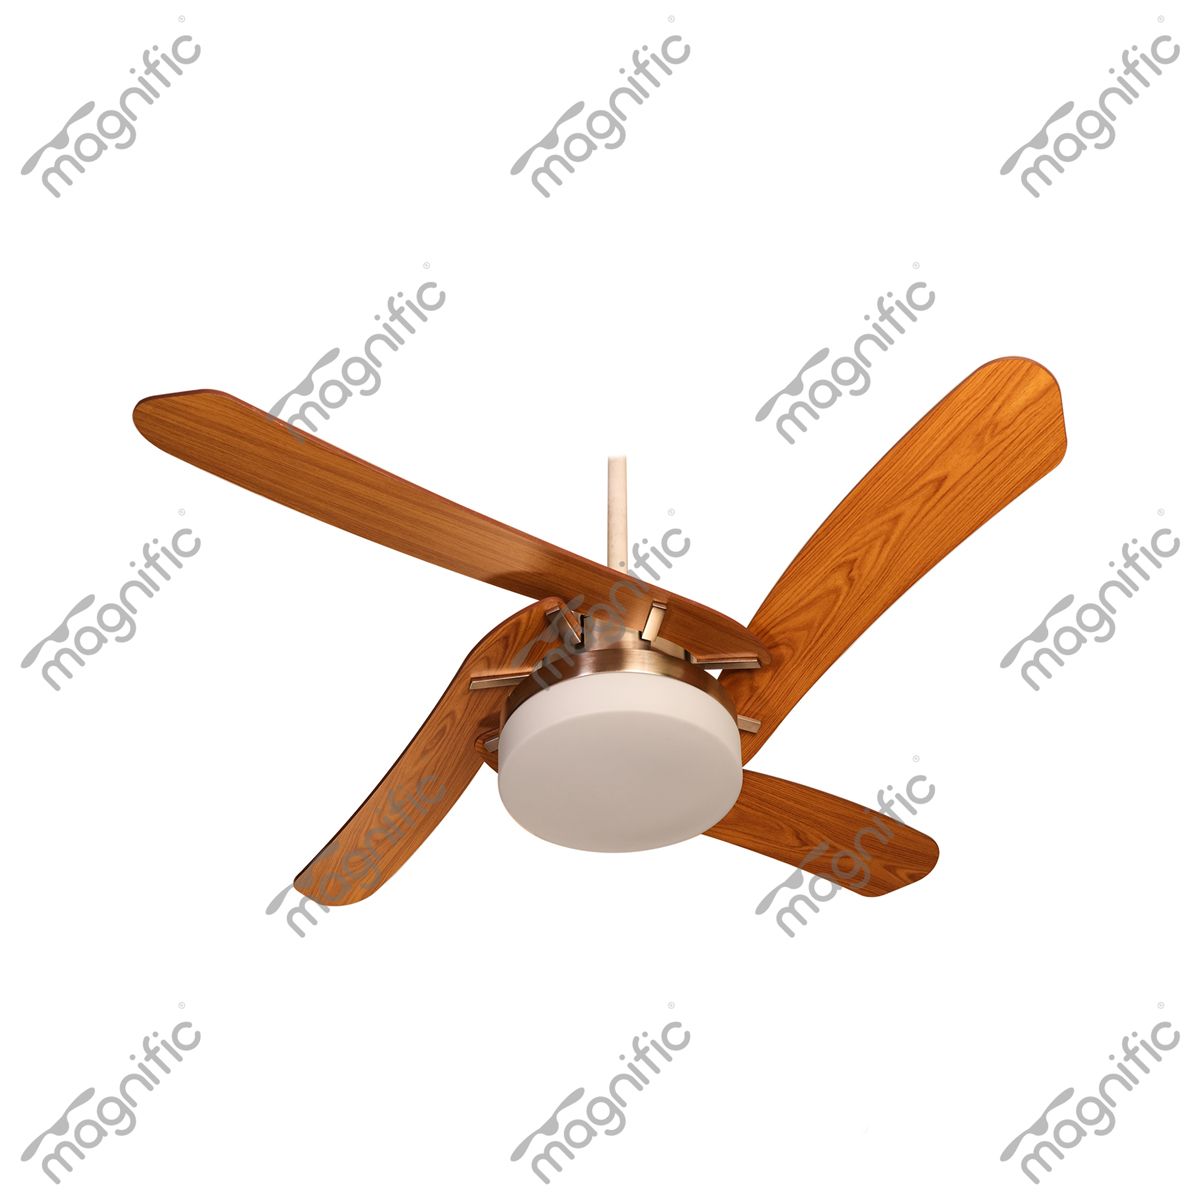 Wooden Ceiling Fan with Light  |  Magnific Designer fans